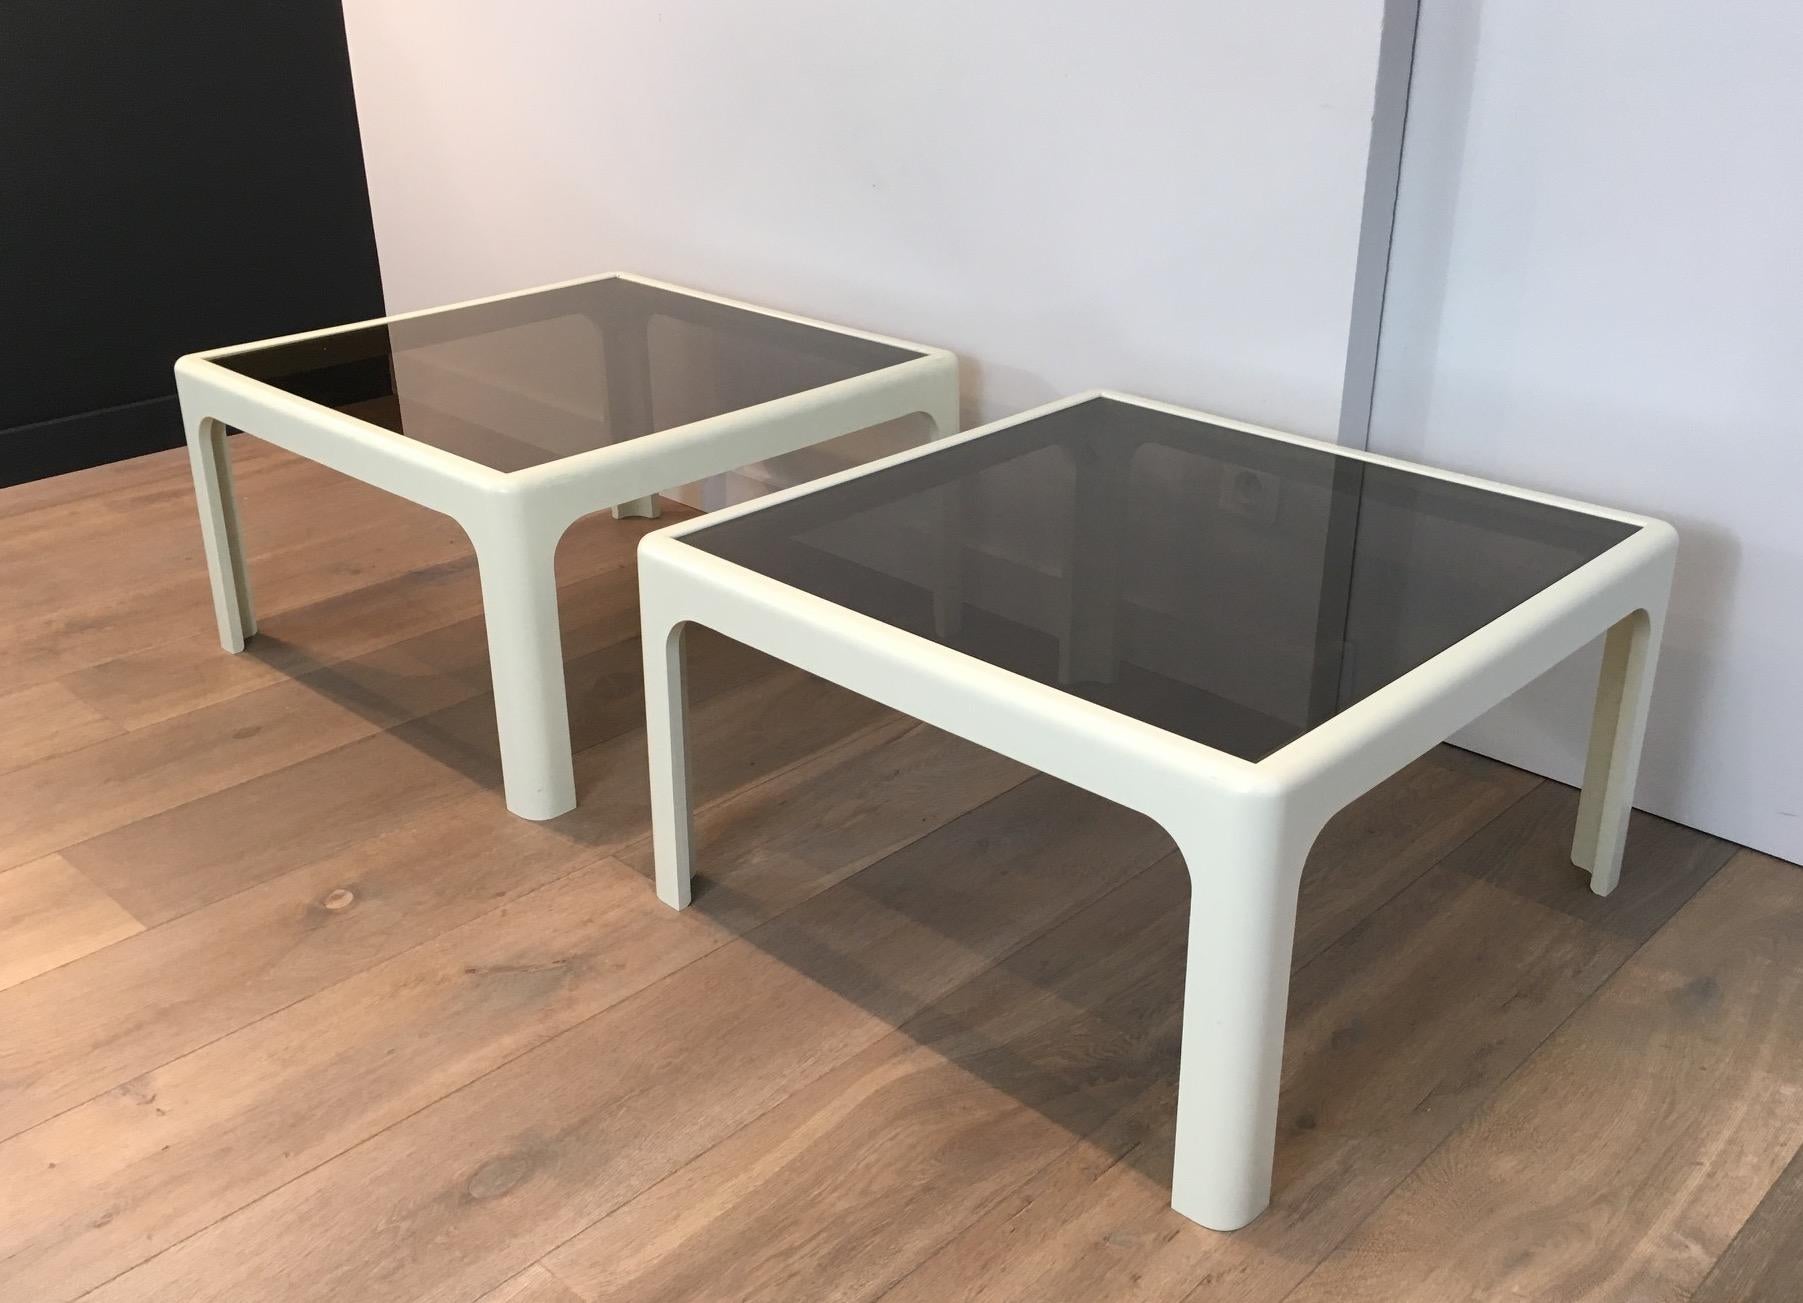 This pair of large side tables are made of white fiber glass with smoked glass shelves on top. The end tables still have their original sticker Poshinger. This is a work German, circa 1970.